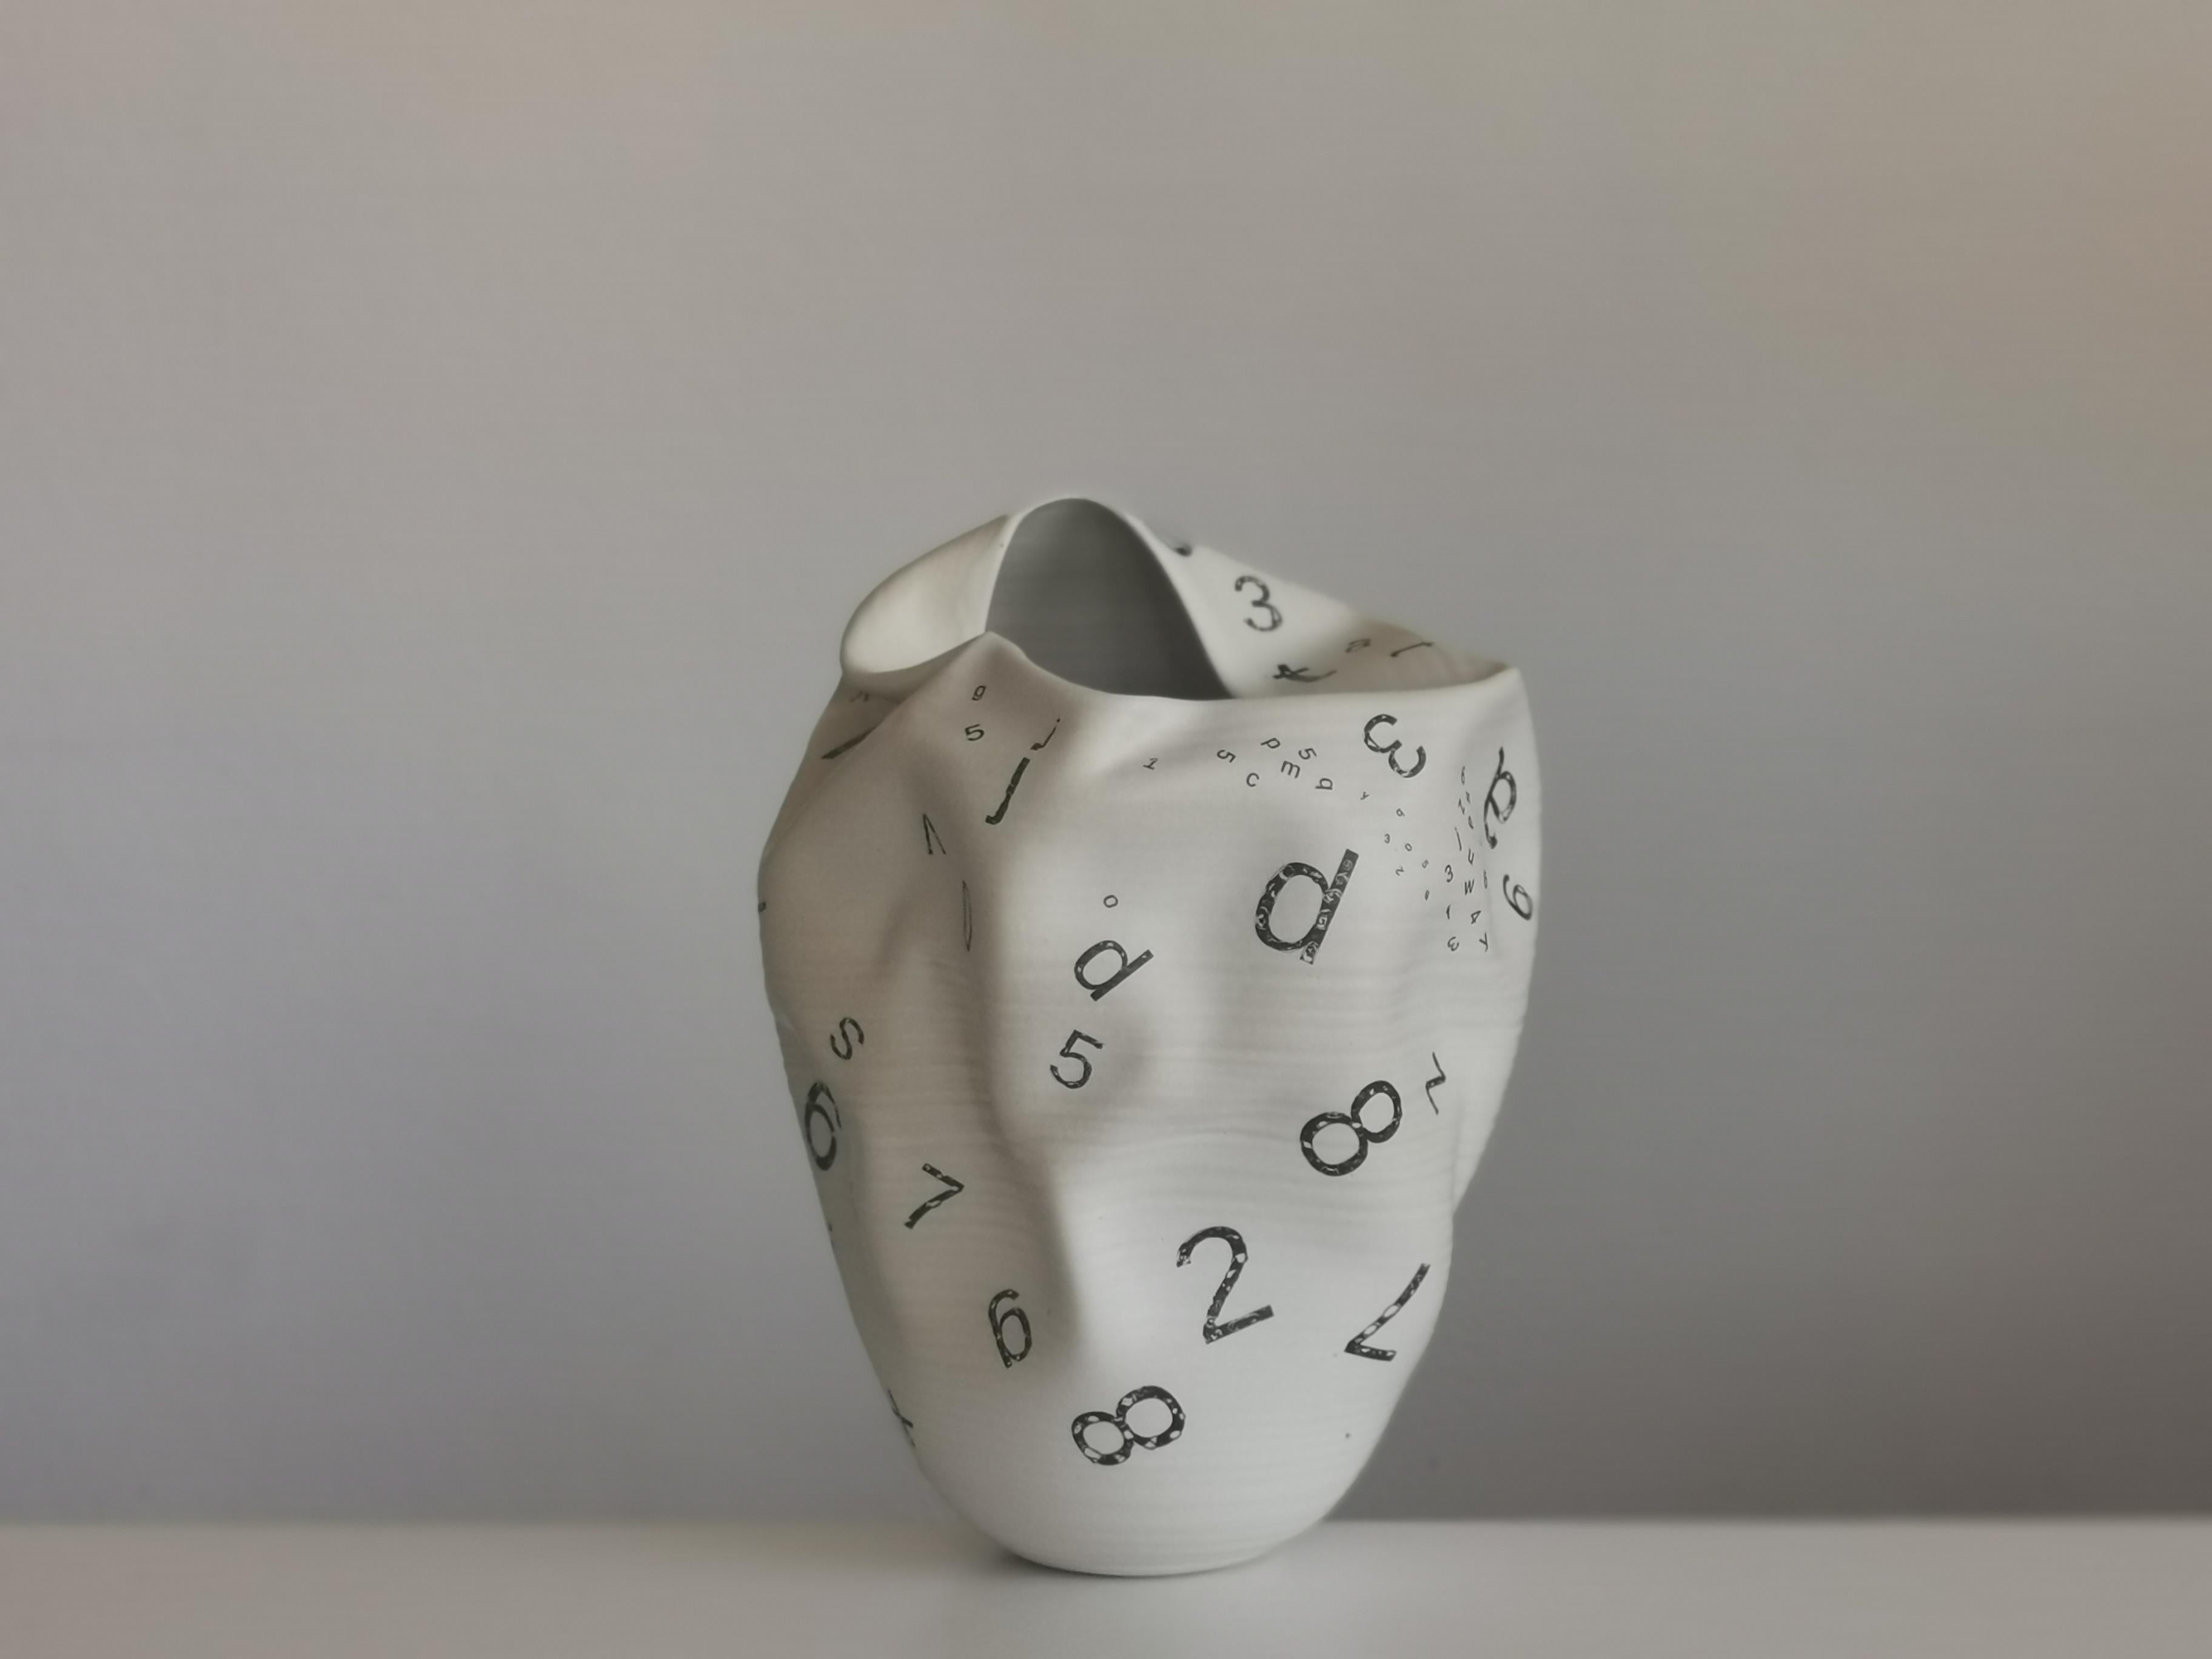 N. 82 white distorted form with letters and numbers. Sumptuous ceramic vessel from ceramic artist Nicholas Arroyave-Portela.

Materials, White St.Thomas clay, Stoneware glazes, Multi fired to cone 9 (1260 degrees).

Measures: H 38 cm W 30 cm D